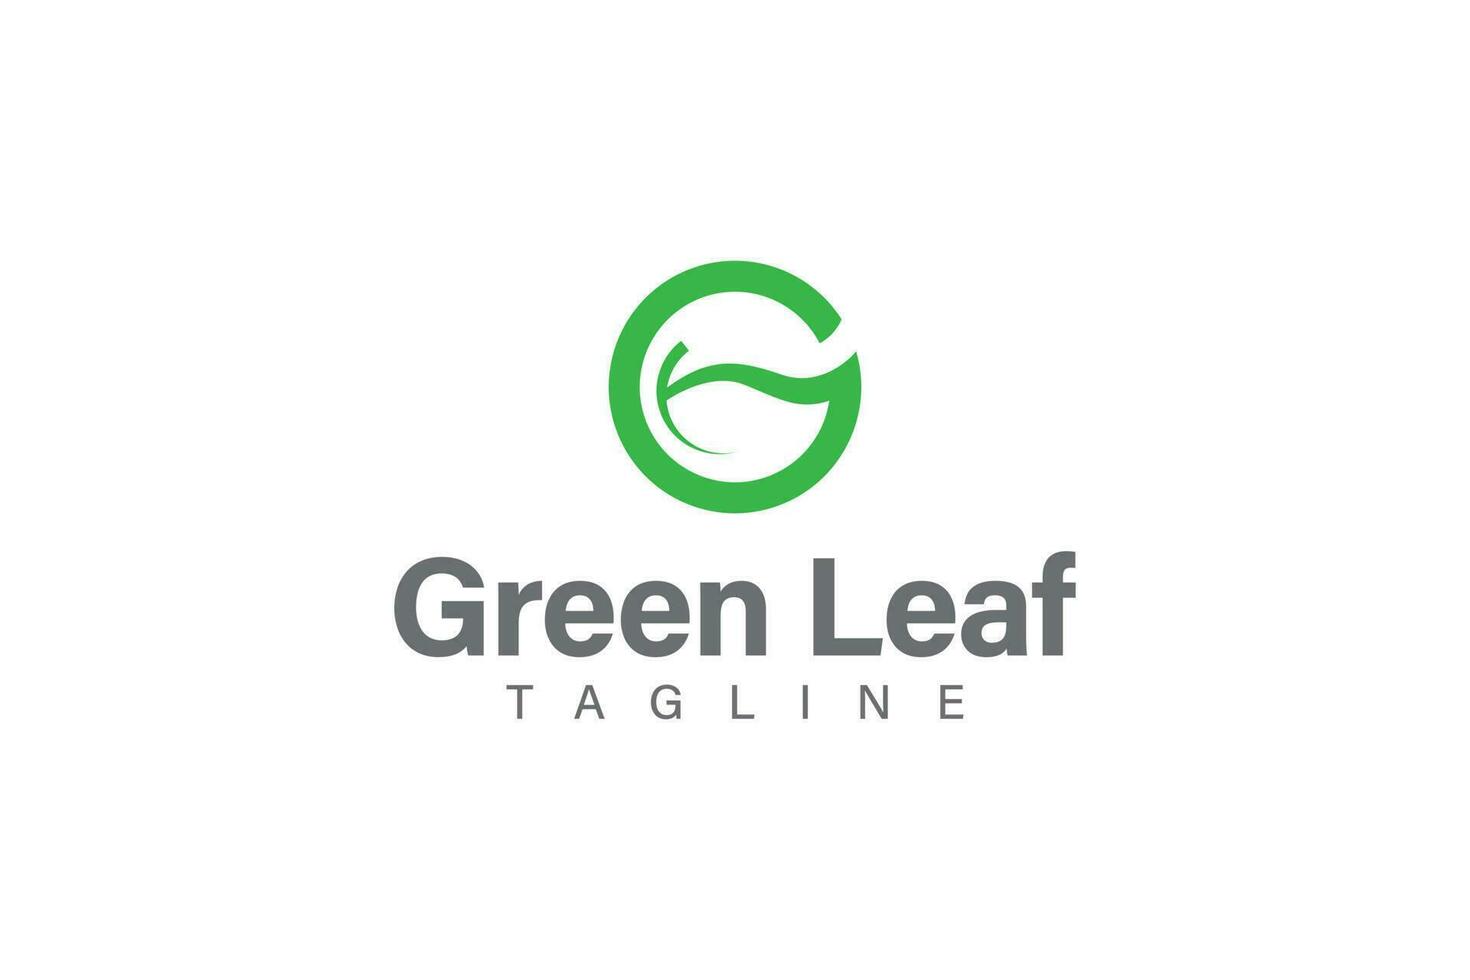 Green leaf logo design vector with initial letter G and leaf concept